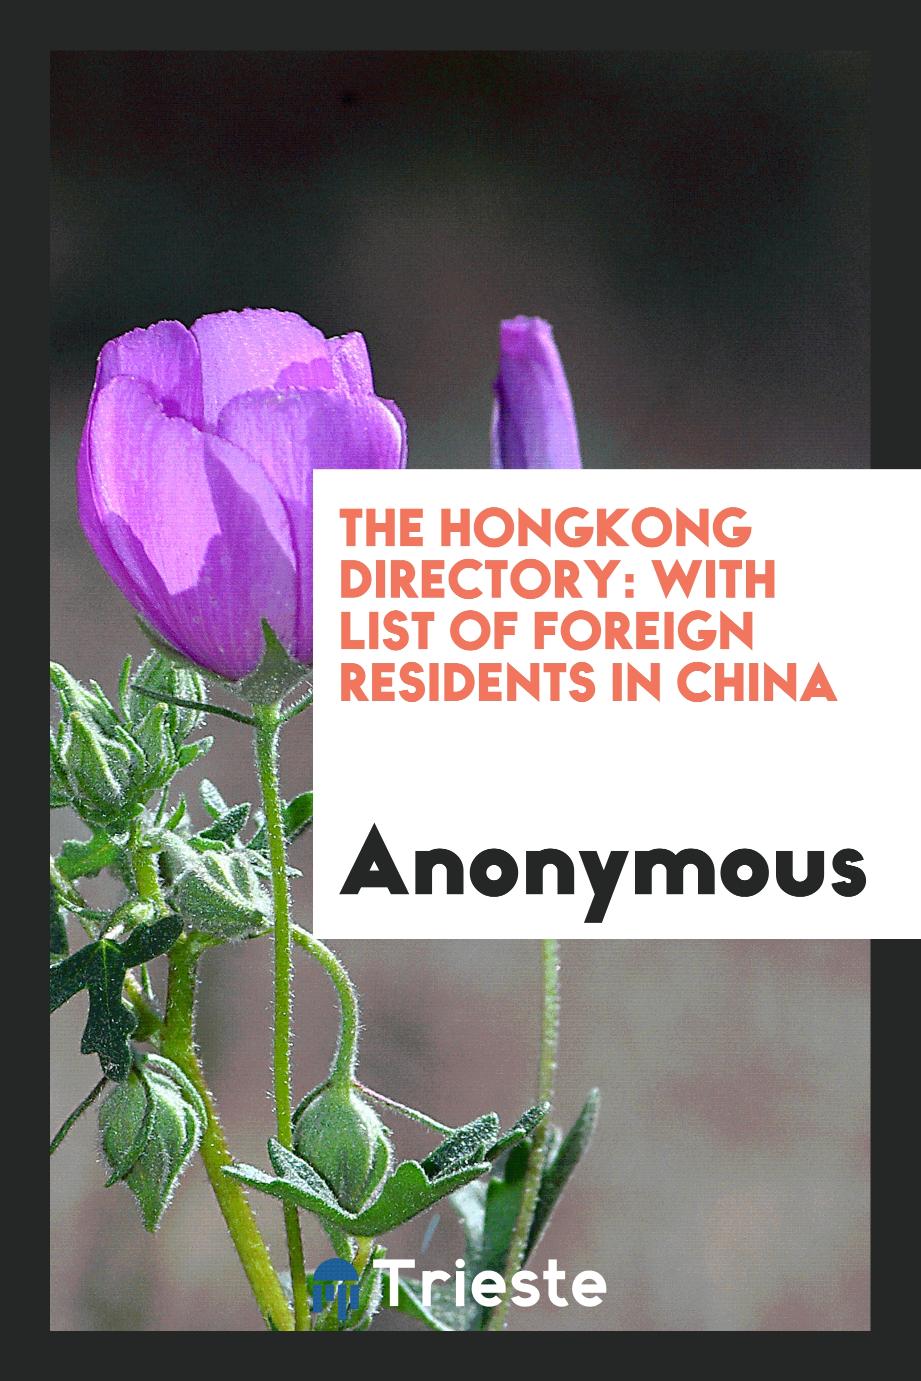 The Hongkong Directory: With List of Foreign Residents in China